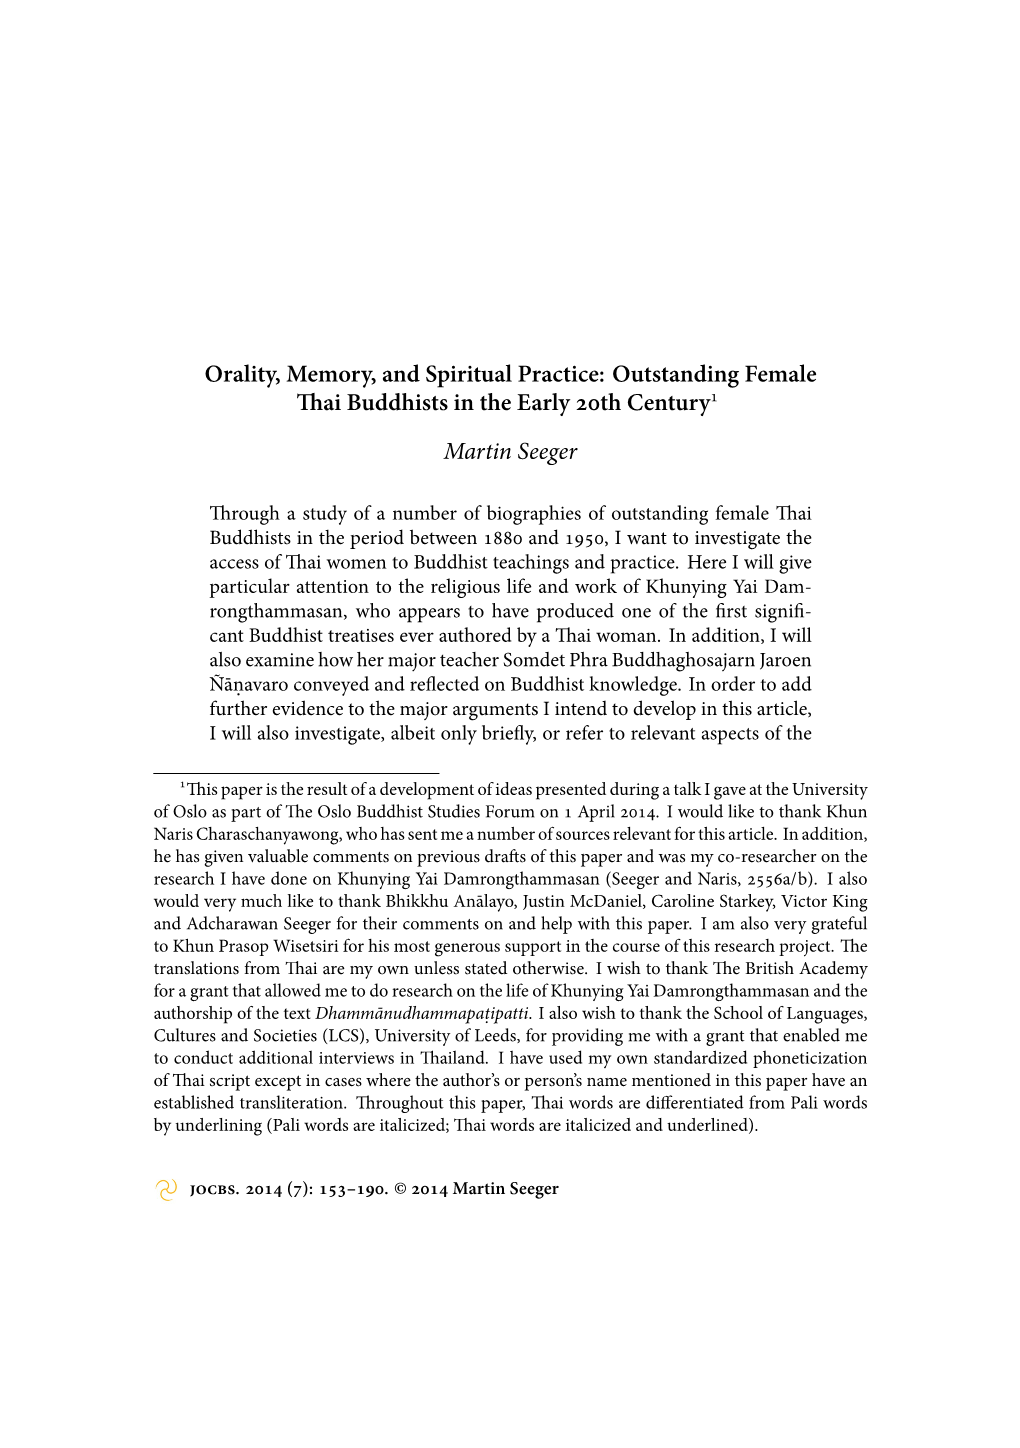 Journal of the Oxford Centre for Buddhist Studies, Vol. 7, November